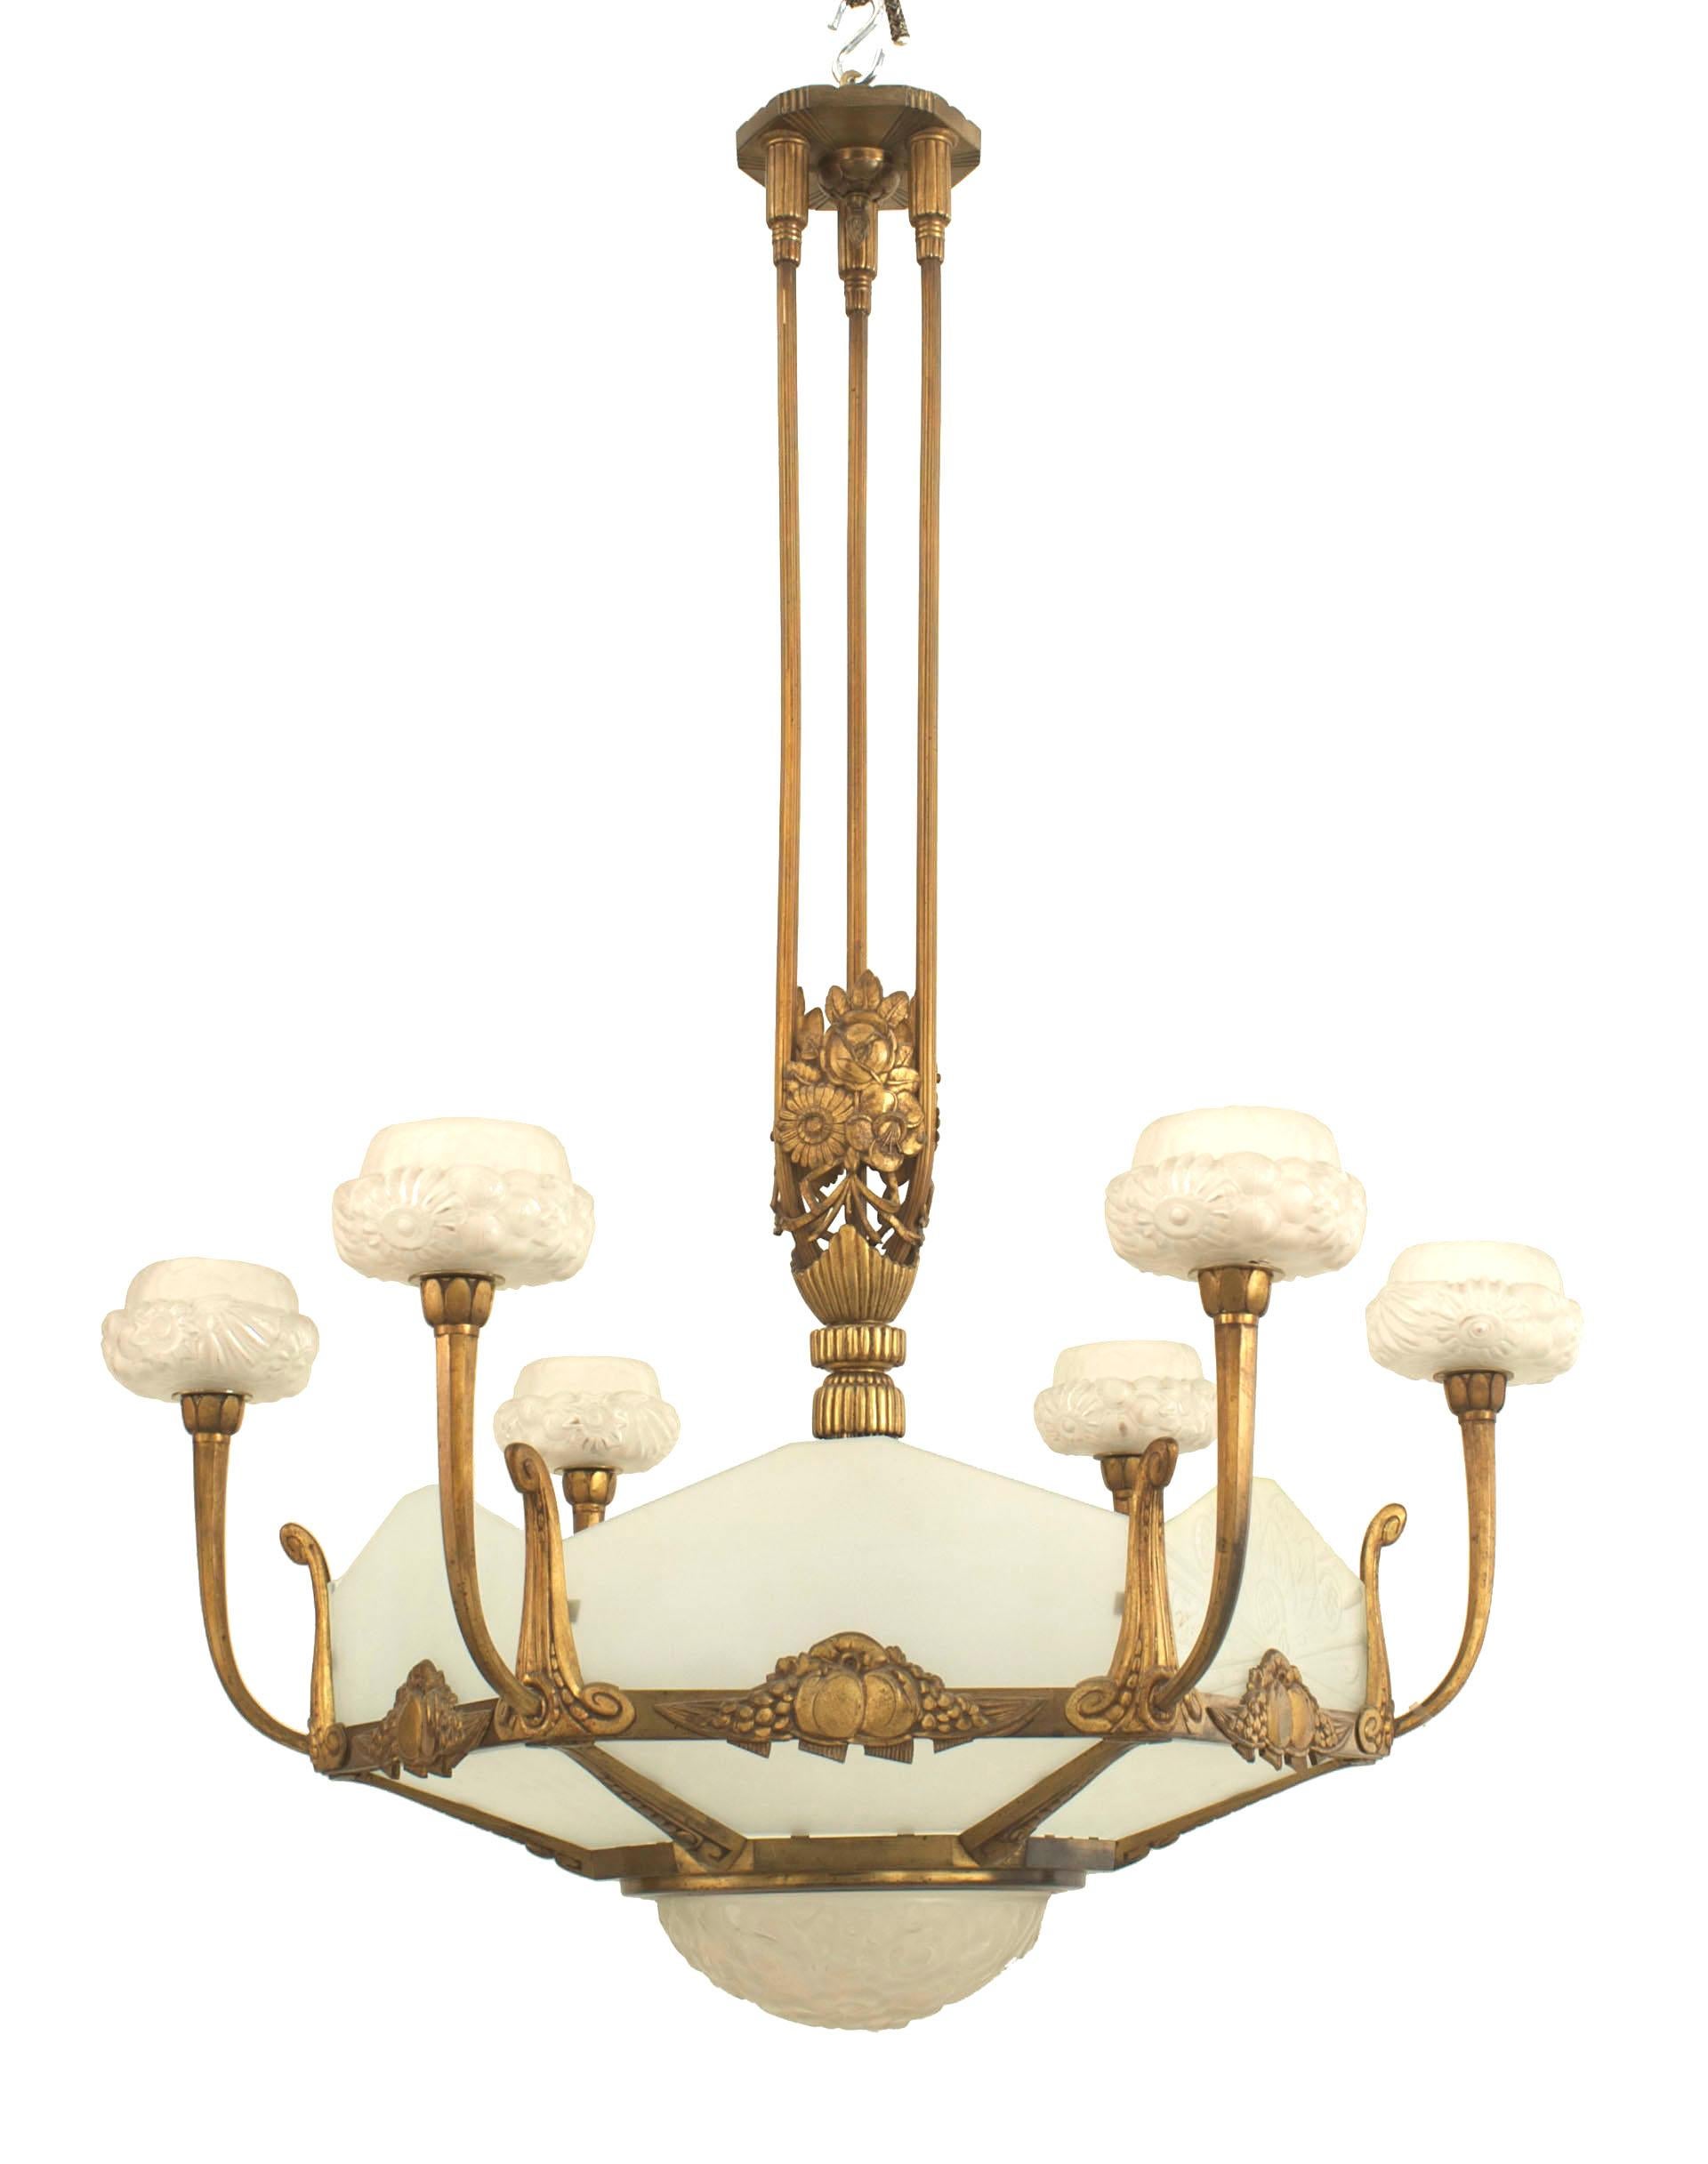 French Art Deco (circa 1925) gilded bronze 6 sided frosted (new) glass chandelier with 6 floral design pressed glass shades and center bowl bottom. (by GENET & MICHON).
  